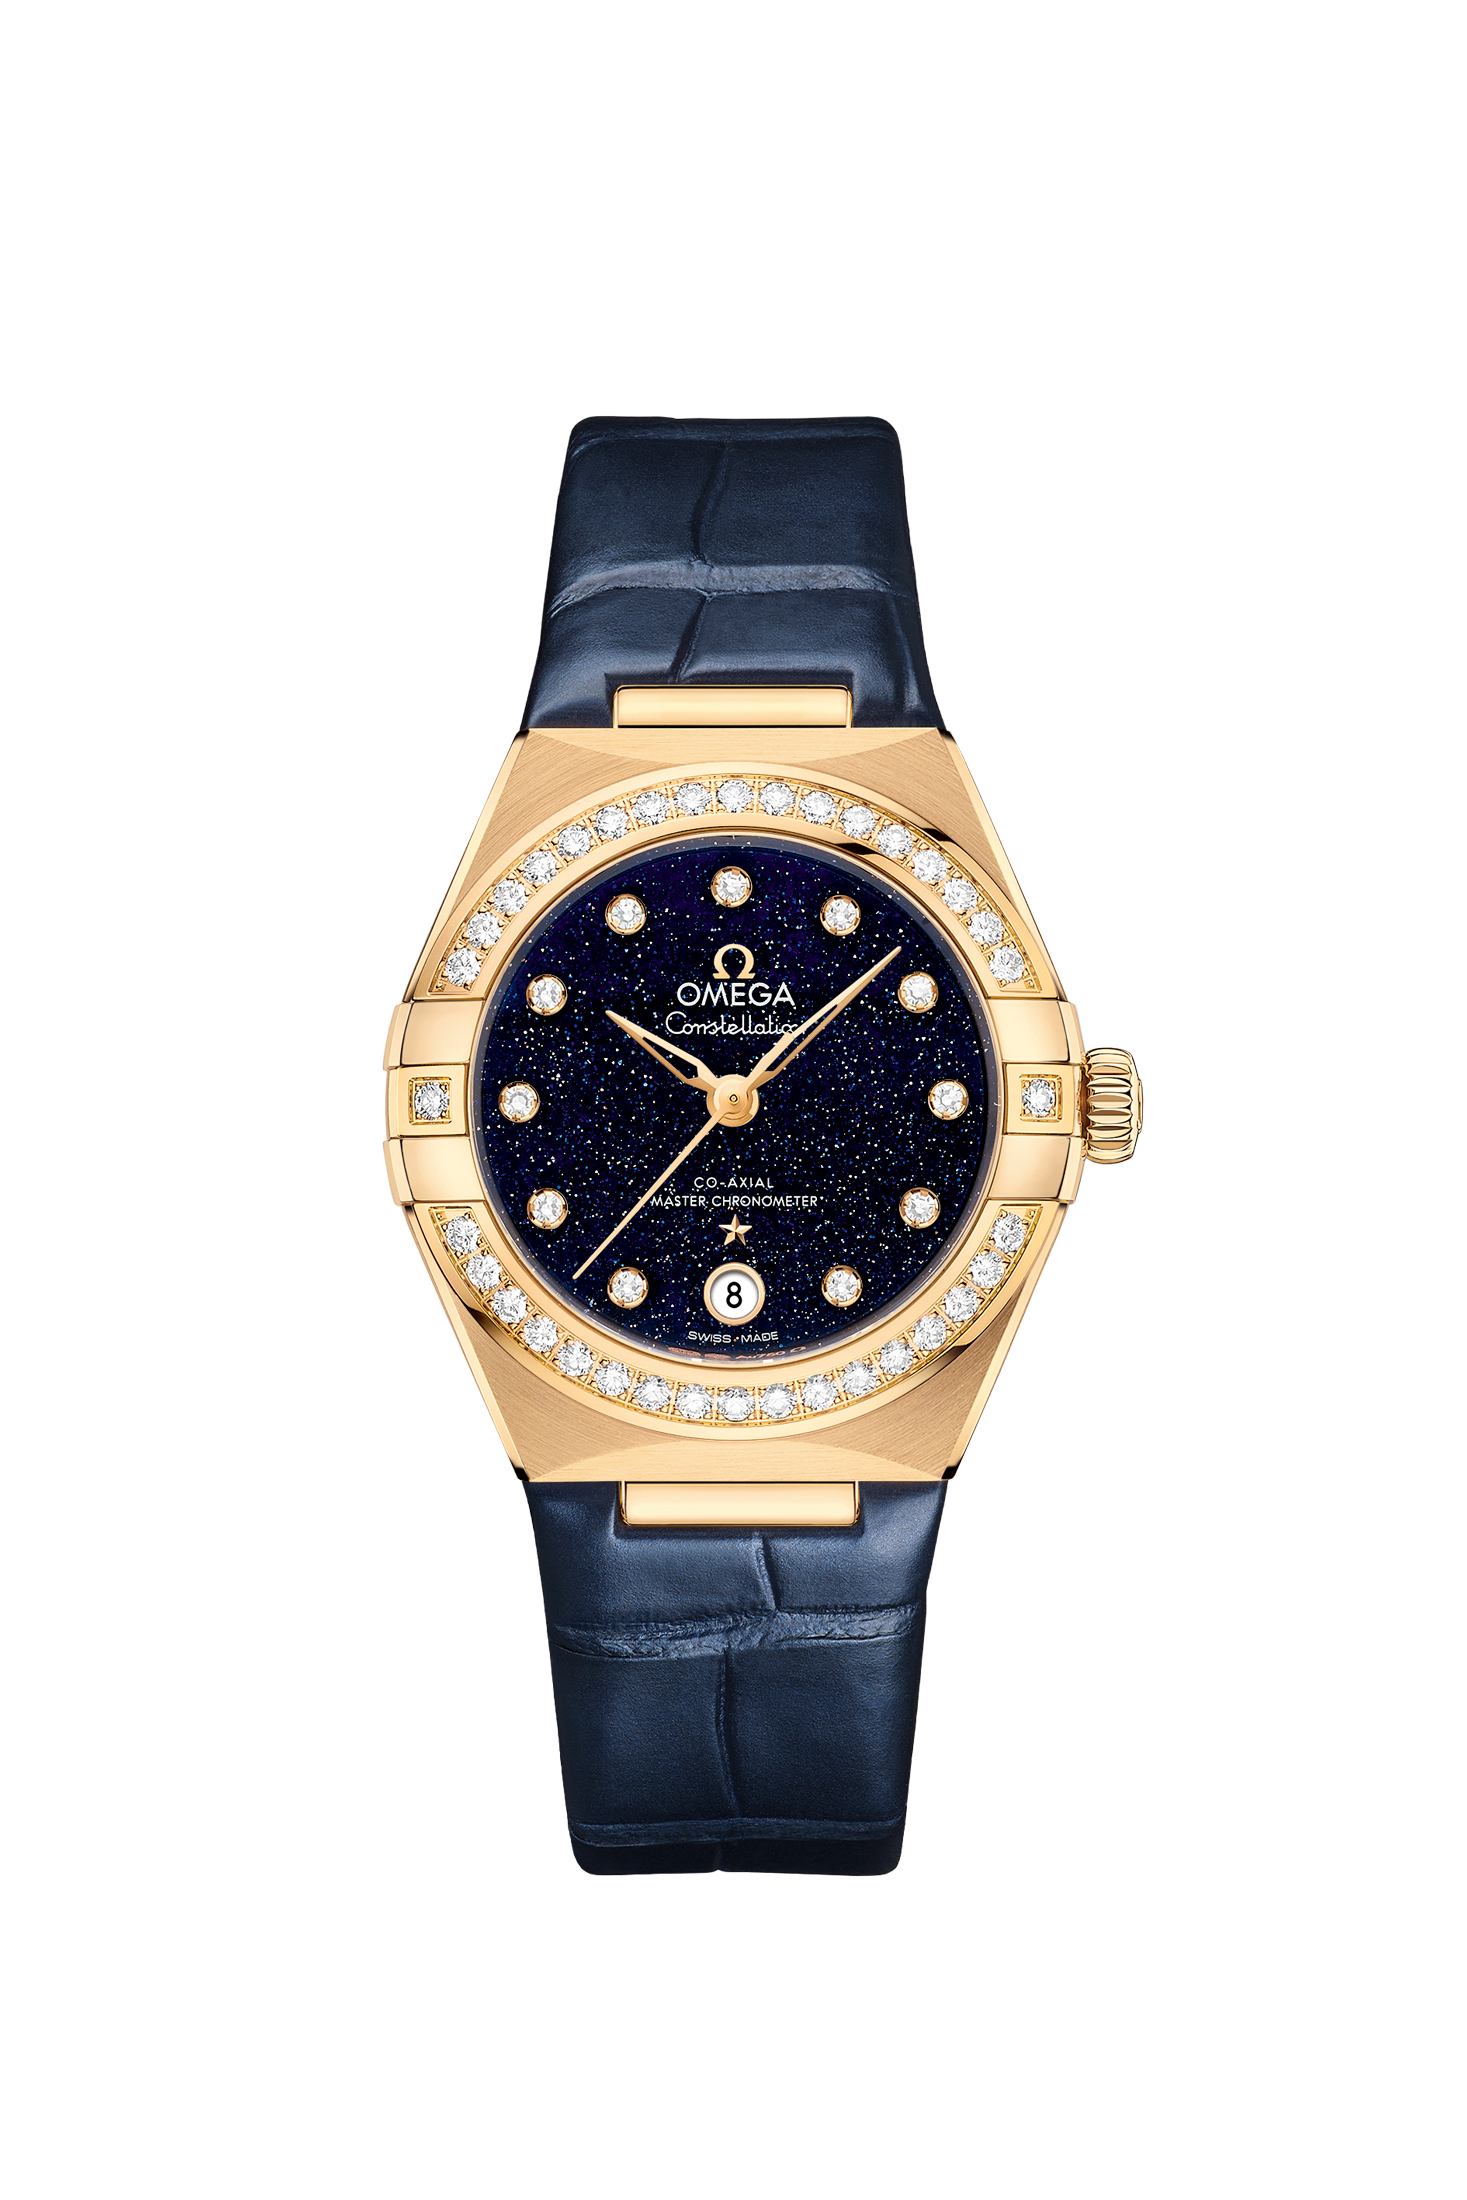 Ladies' watch  OMEGA, Constellation Co Axial Master Chronometer / 29mm, SKU: 131.58.29.20.53.001 | watchphilosophy.co.uk